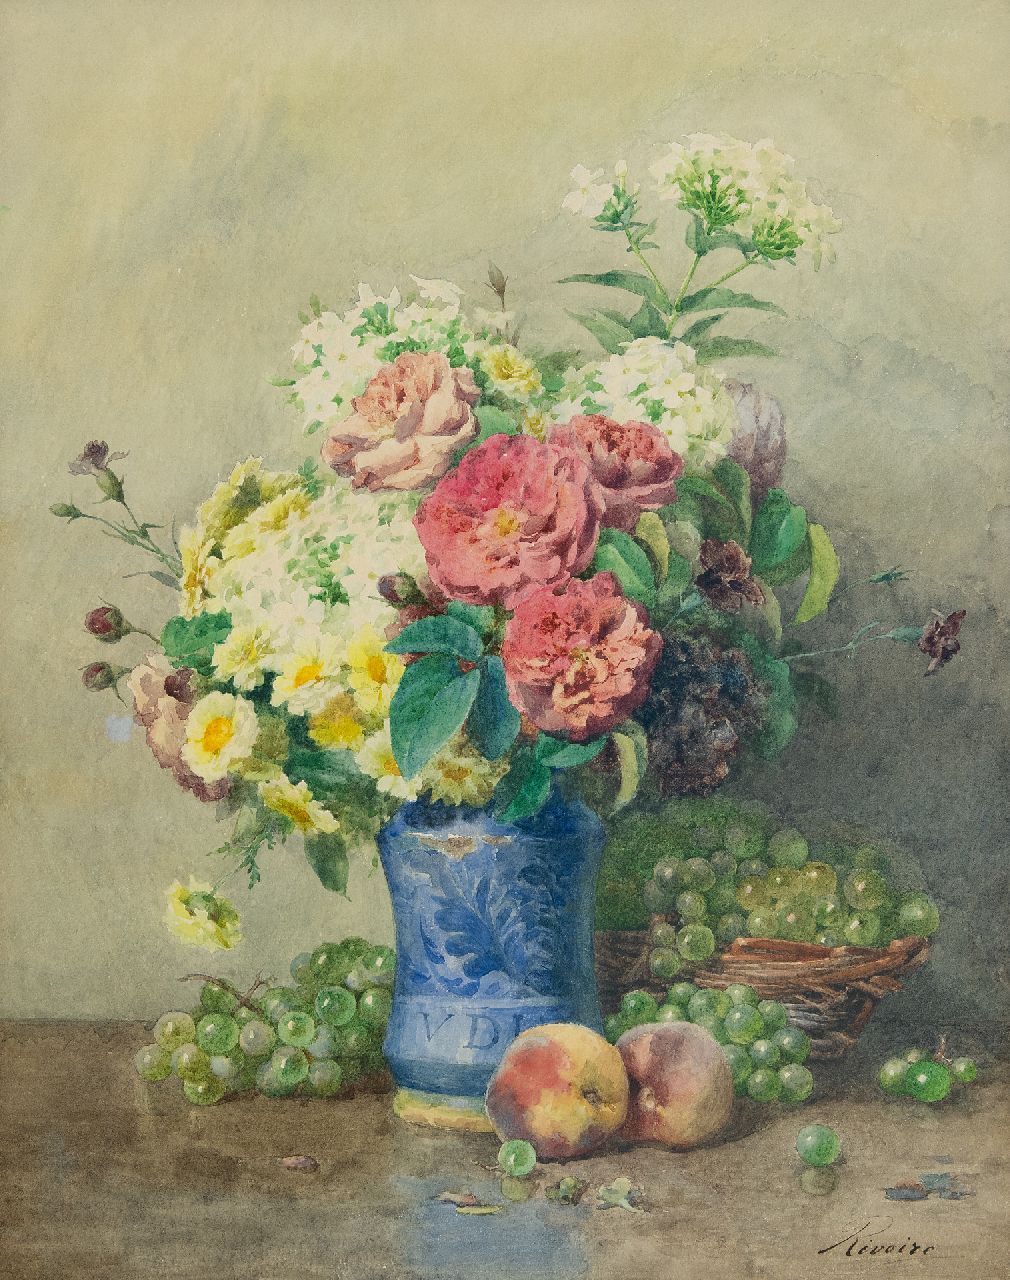 Rivoire F.  | François Rivoire | Watercolours and drawings offered for sale | Still life with roses, phloxes and fruit, watercolour on paper 58.4 x 46.4 cm, signed l.r.